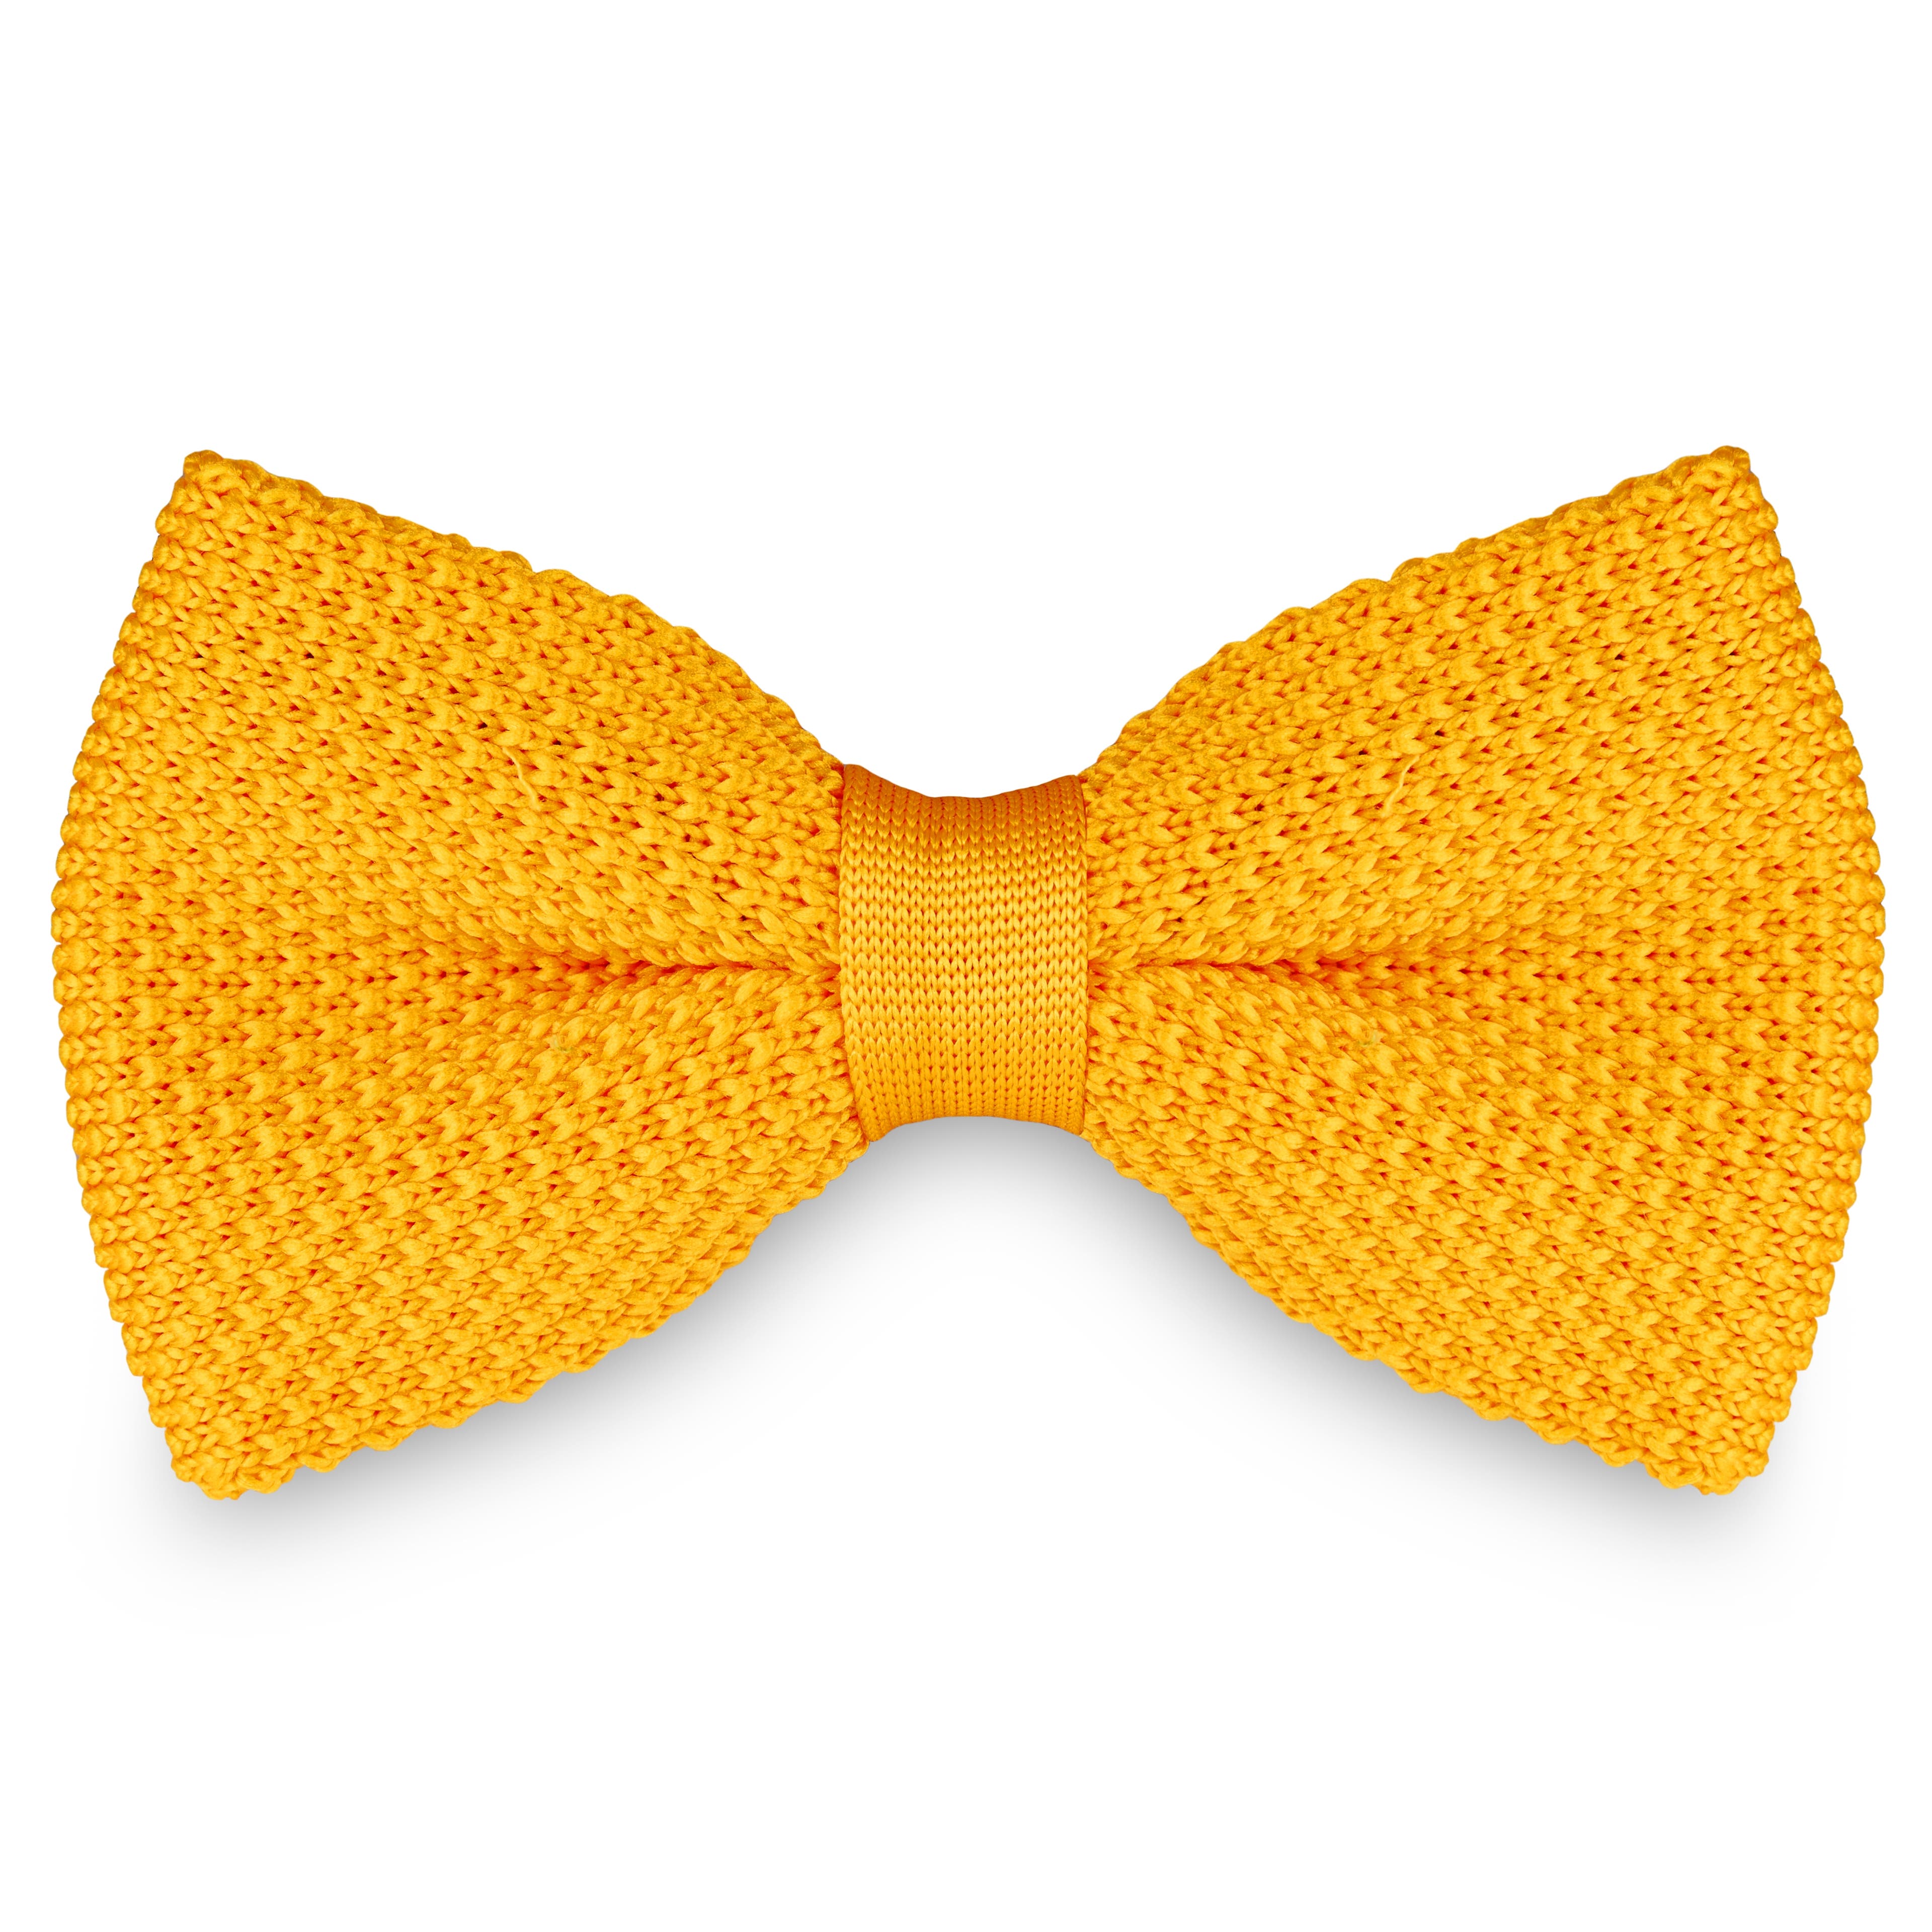 Mustard Yellow Knitted Pre-Tied Bow Tie